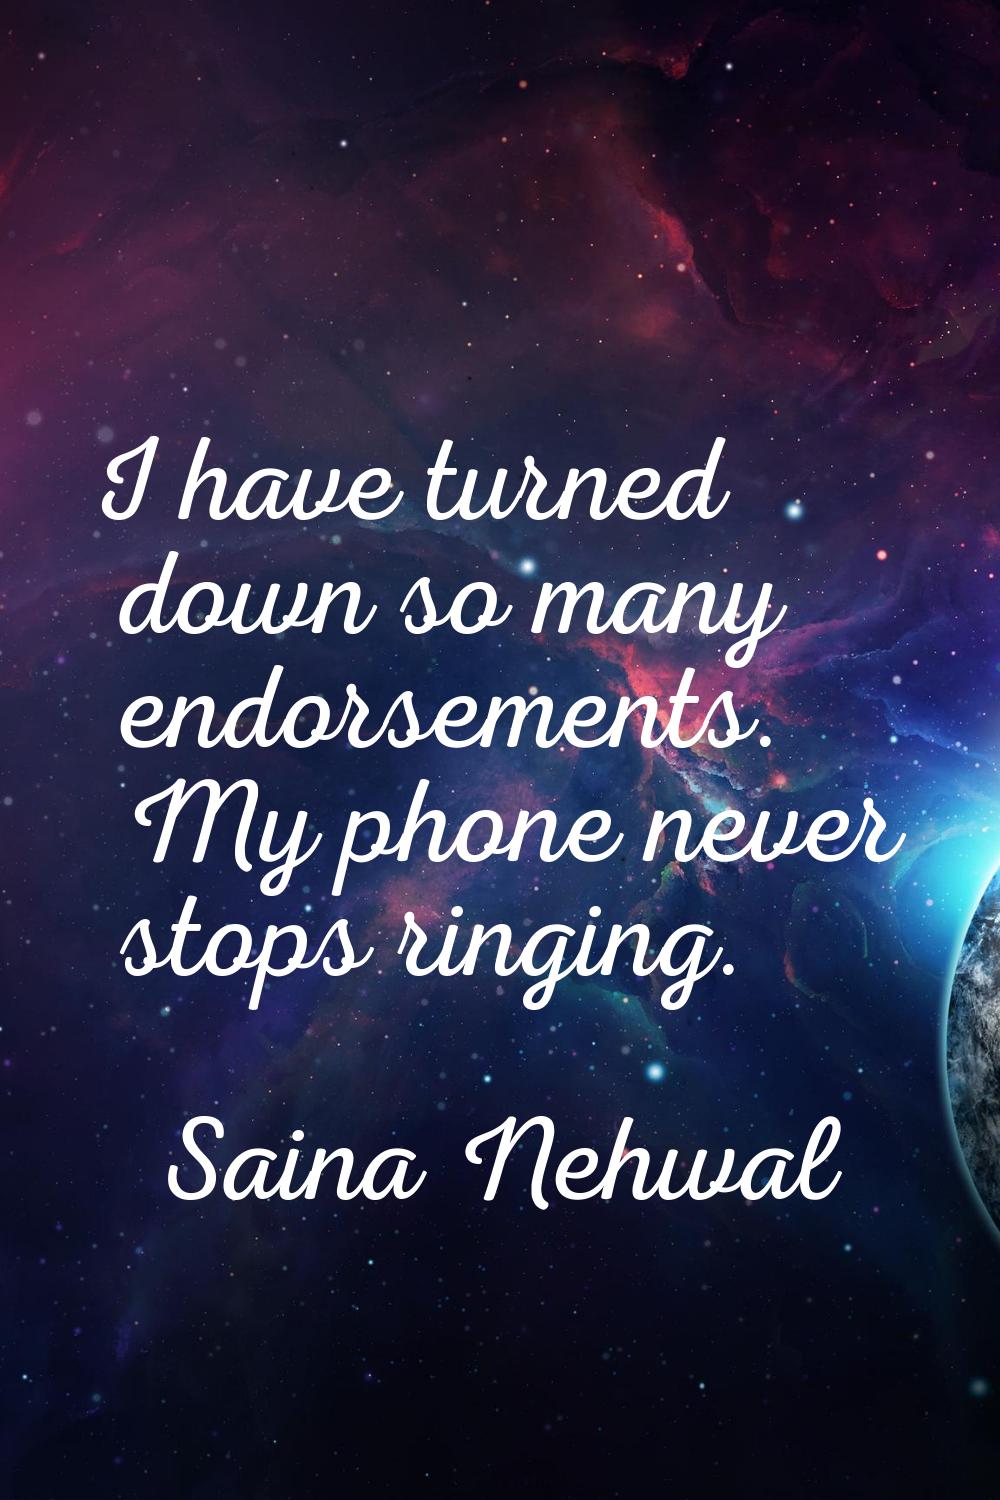 I have turned down so many endorsements. My phone never stops ringing.